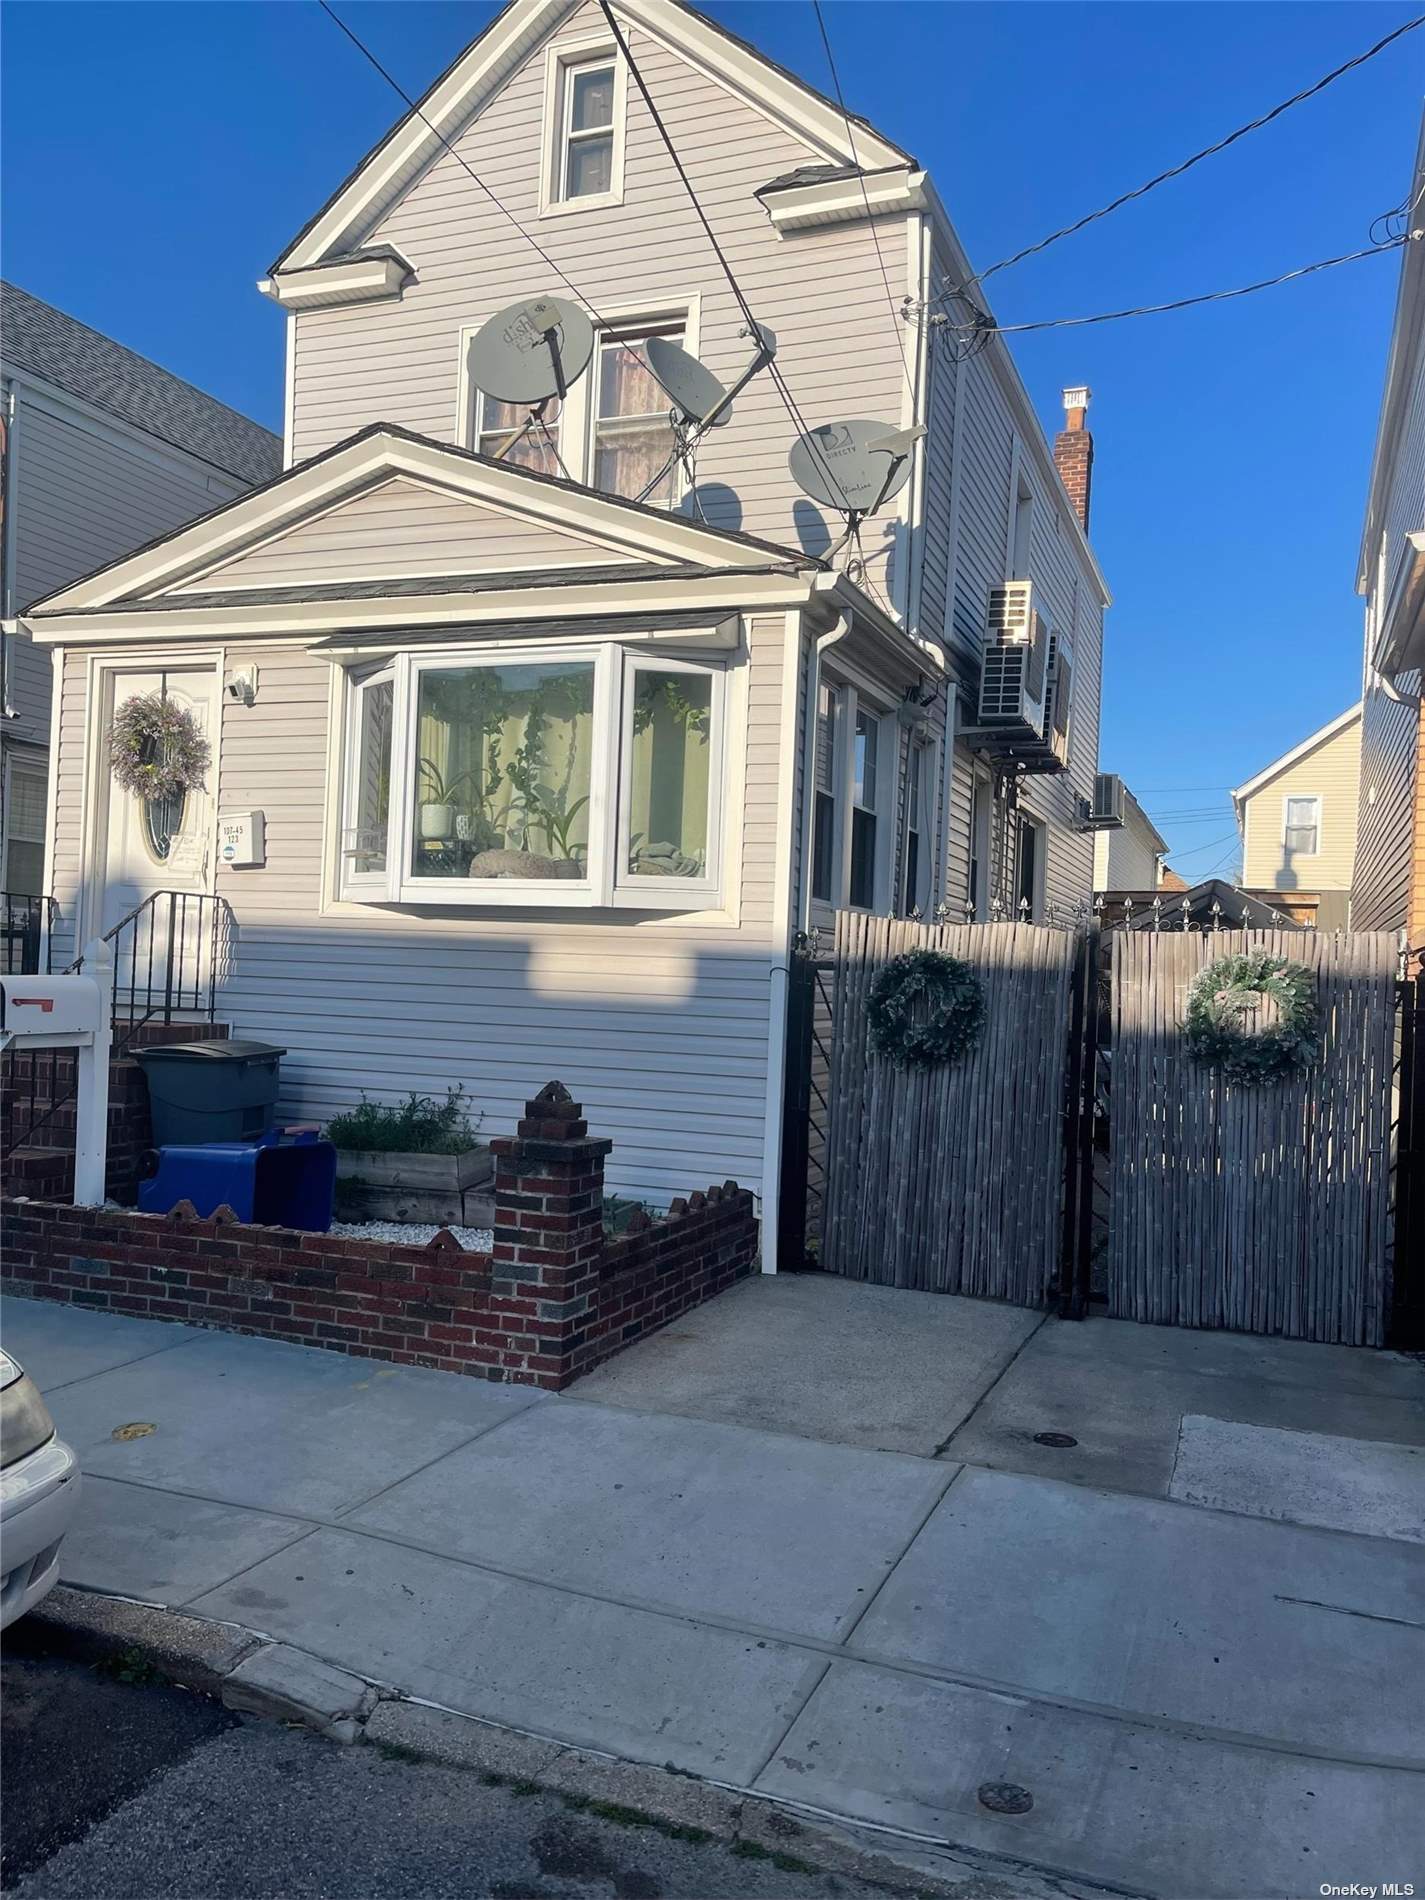 Listing in Richmond Hill, NY